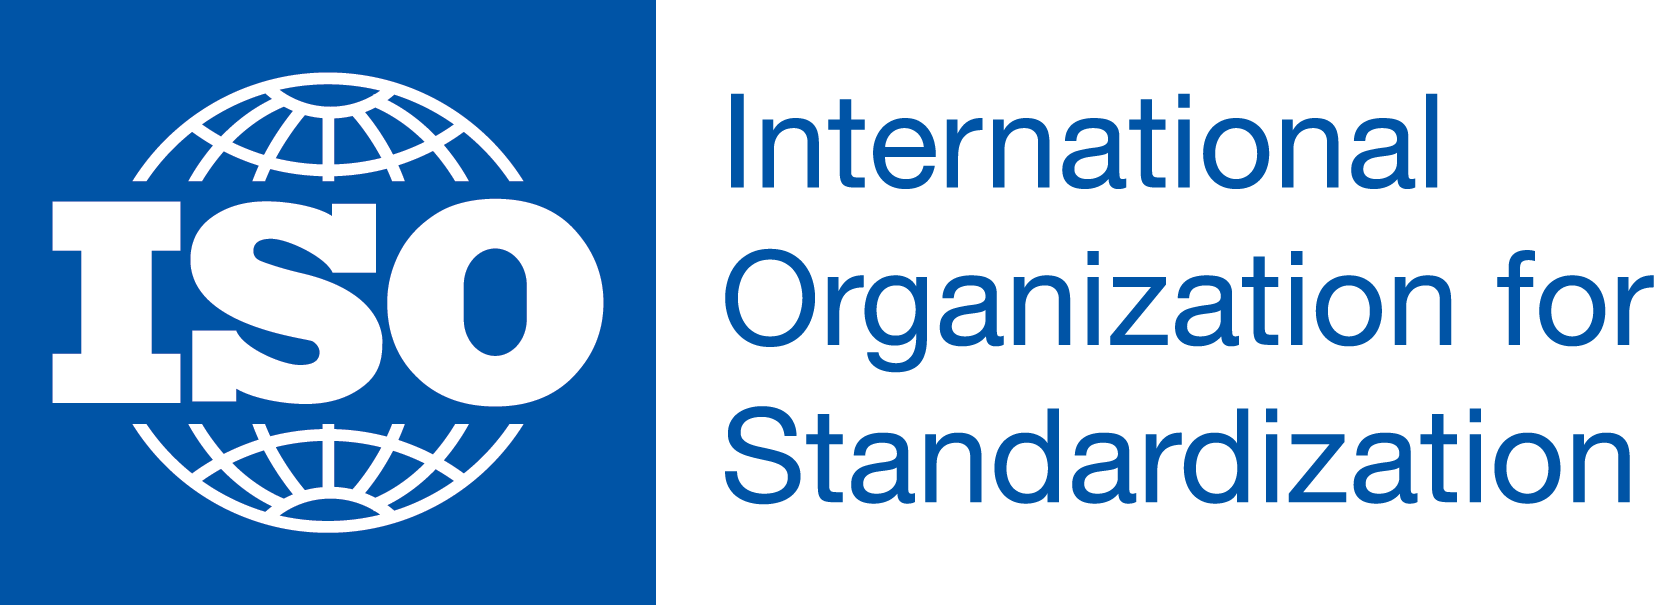 ISO-Logo.png